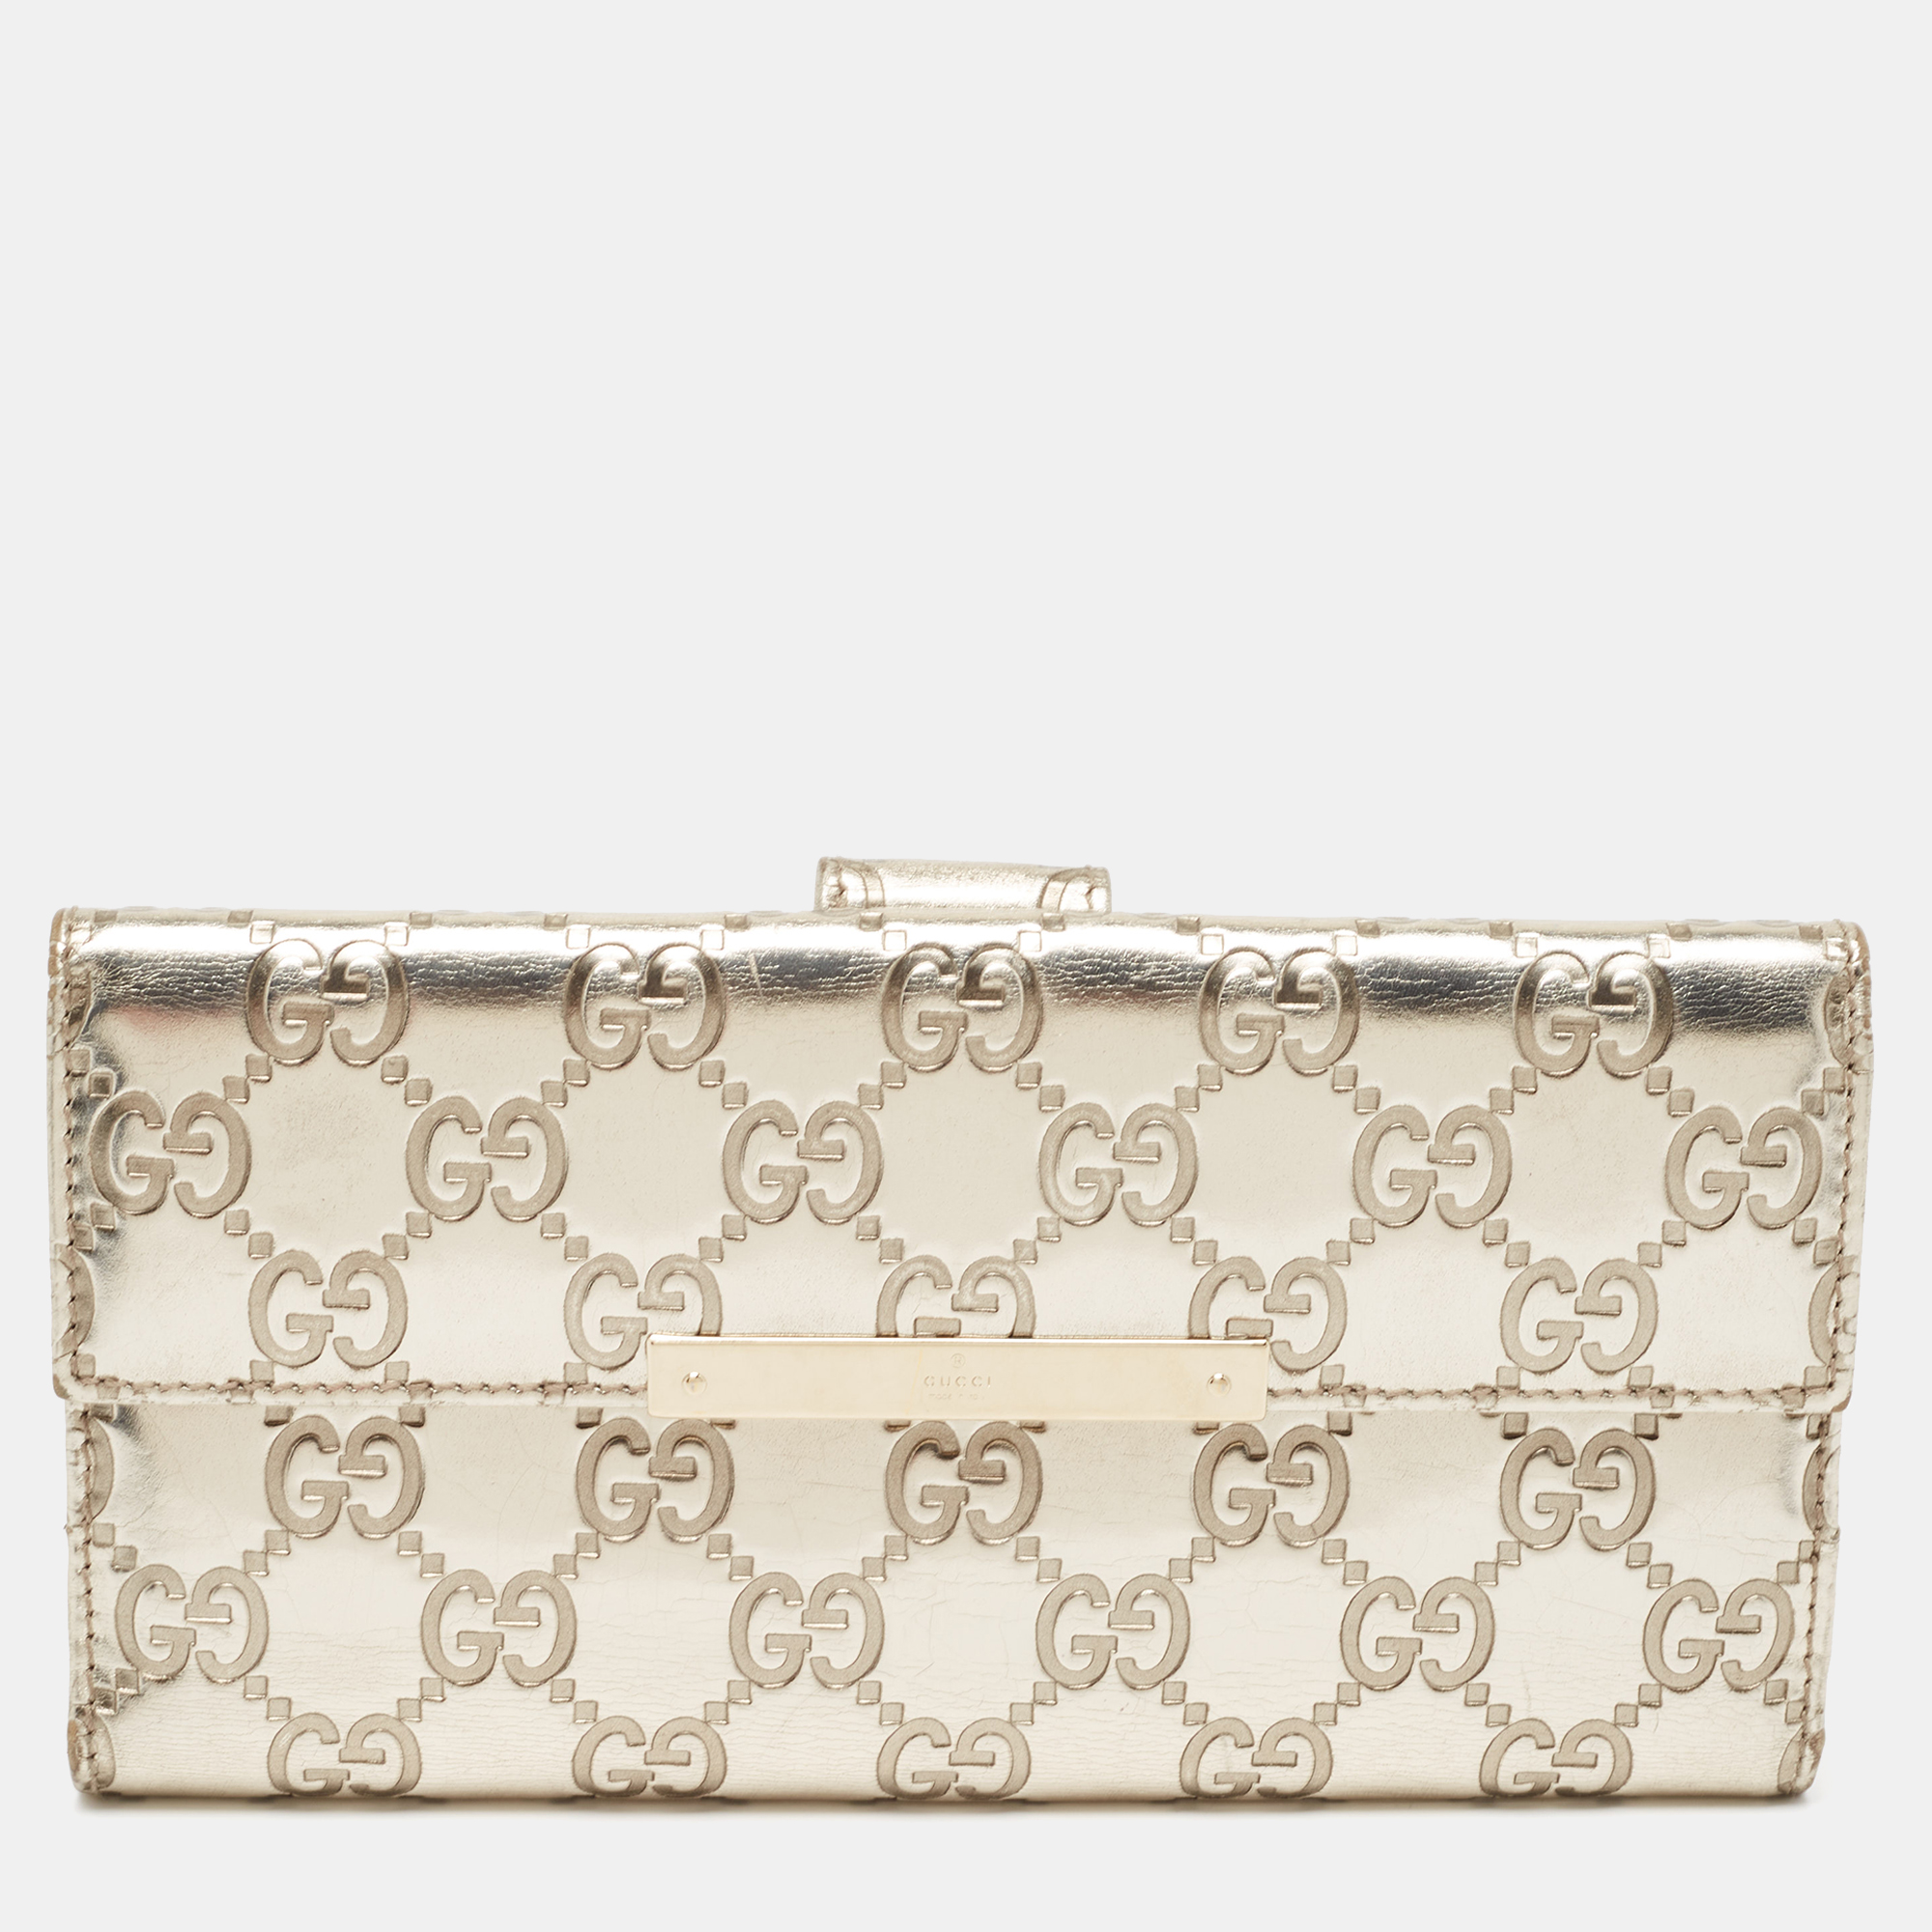 Gucci metallic gold guccissima leather flap continental wallet